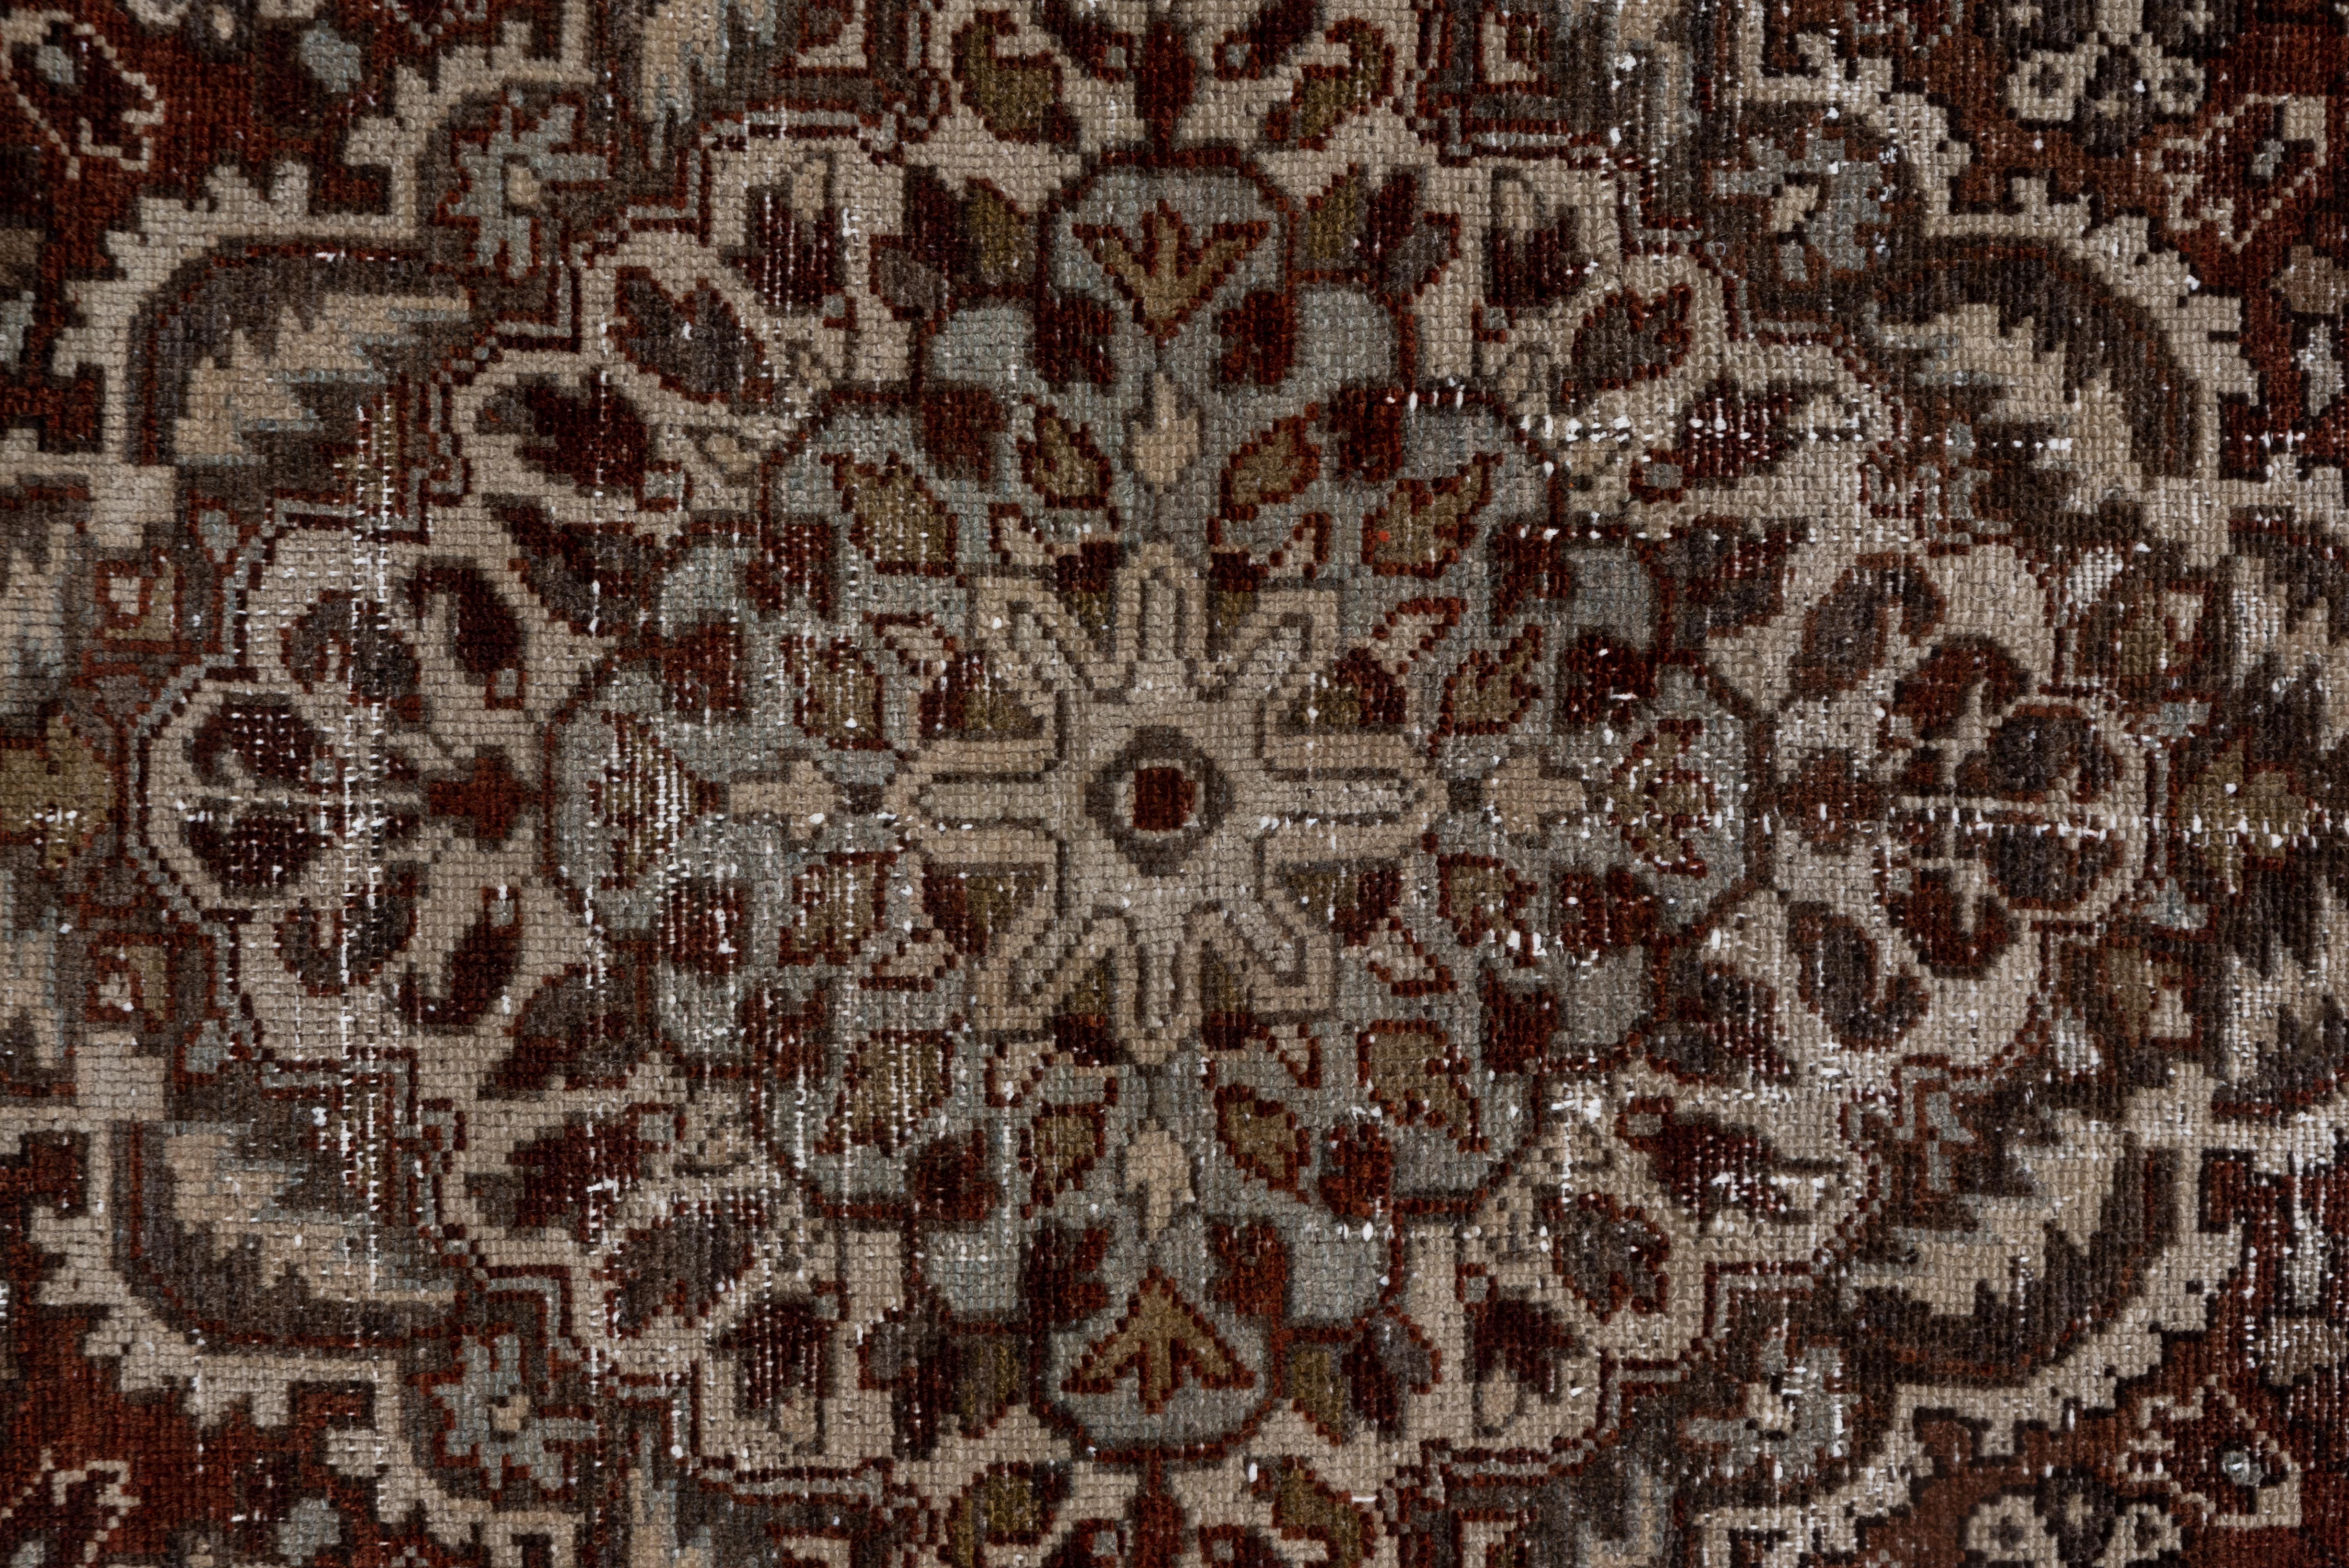 Center Diamond Medallion Rug in Rusted Grape For Sale 1